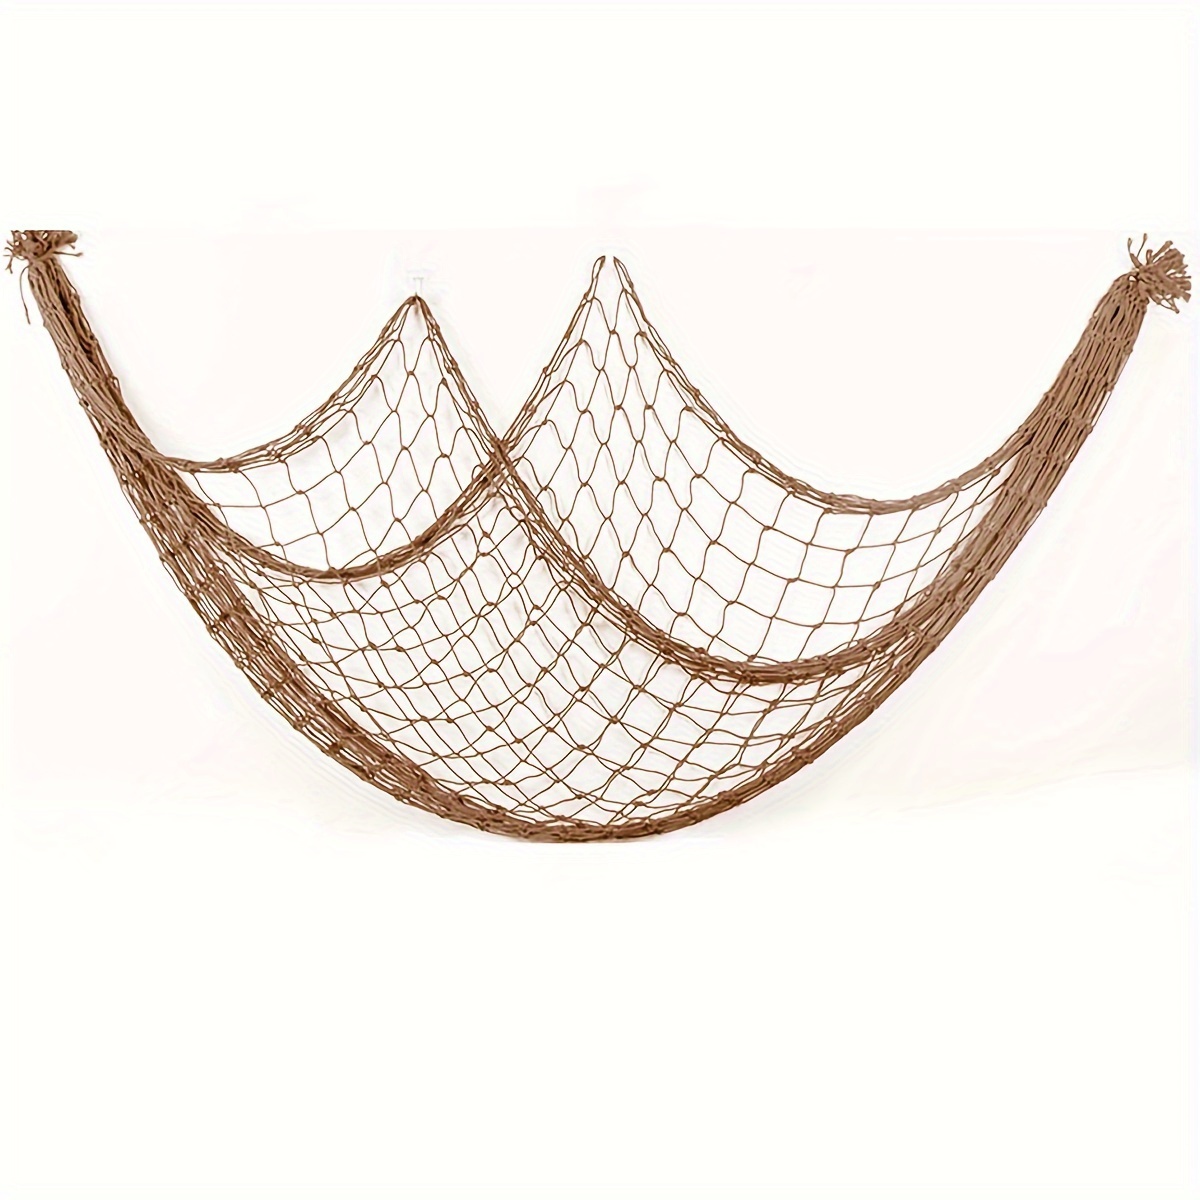 Maoww Decorative Fish Netting Portable Hanging Stylish Household Bedroom  Living Room Bar Fishing Net Decor Ornament with Beige 